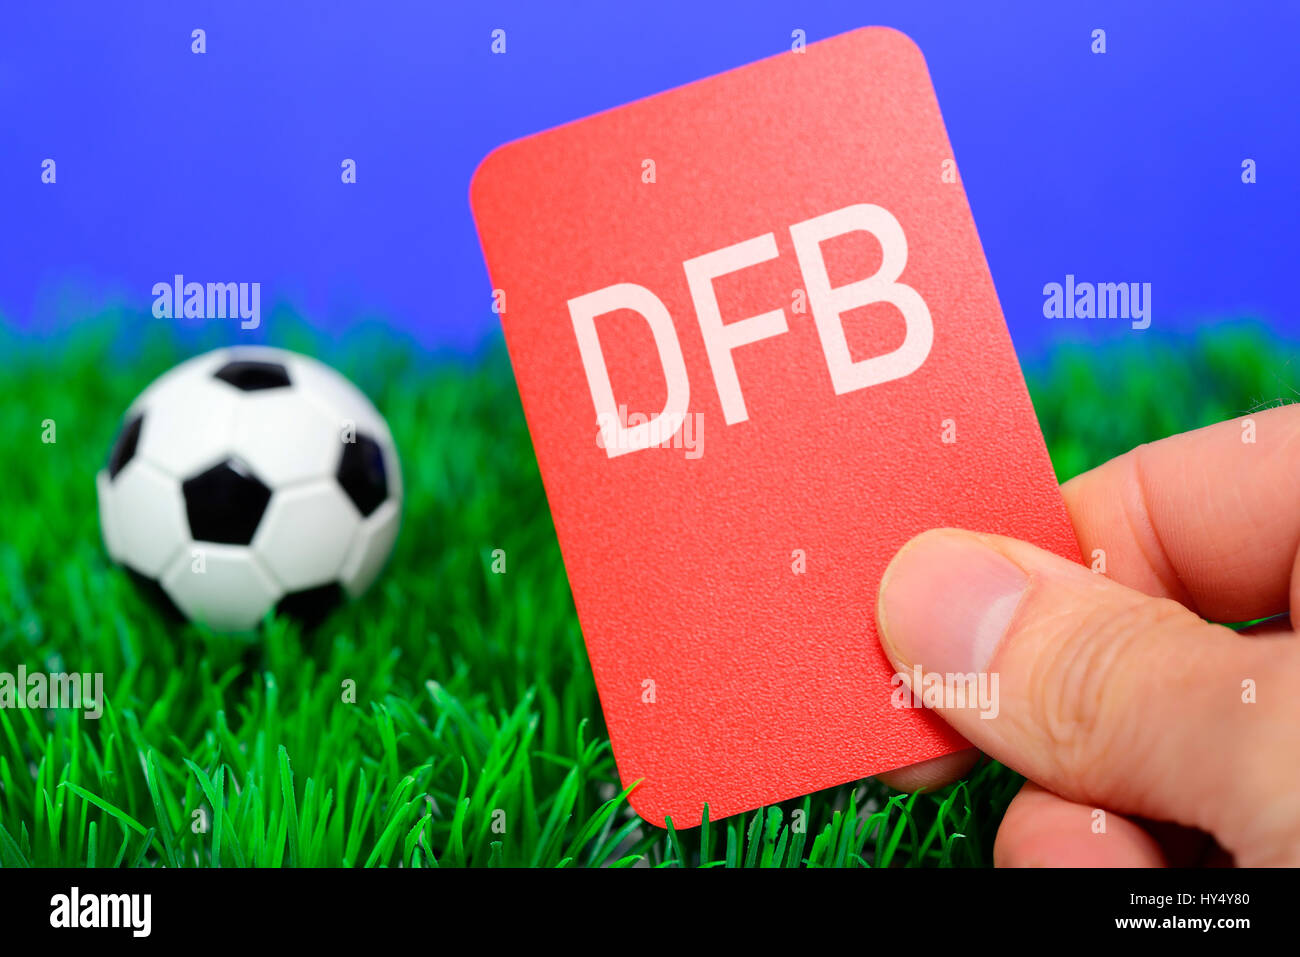 Miniature football and hand with red map, German Football Association scandal, Miniaturfu?ball und Hand mit roter Karte, DFB-Skandal Stock Photo